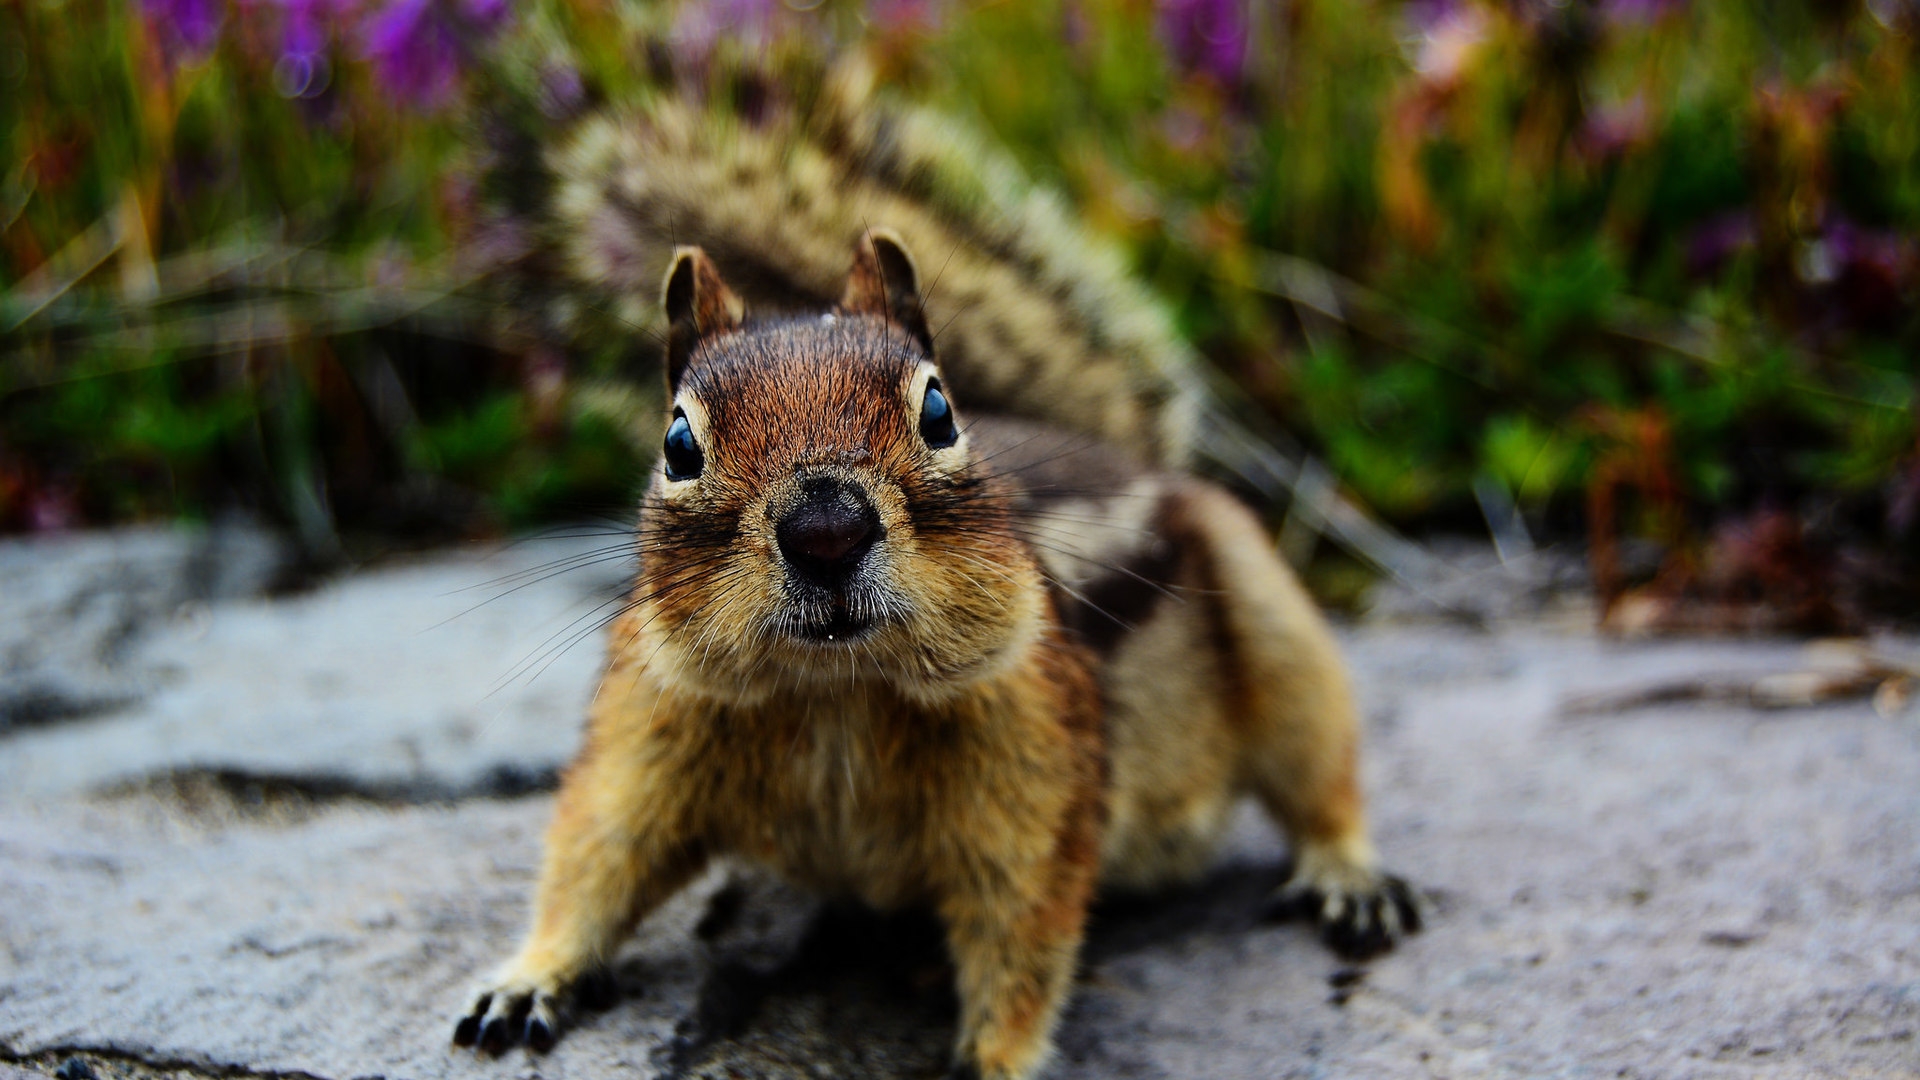 Squirrel Close Up for 1920 x 1080 HDTV 1080p resolution